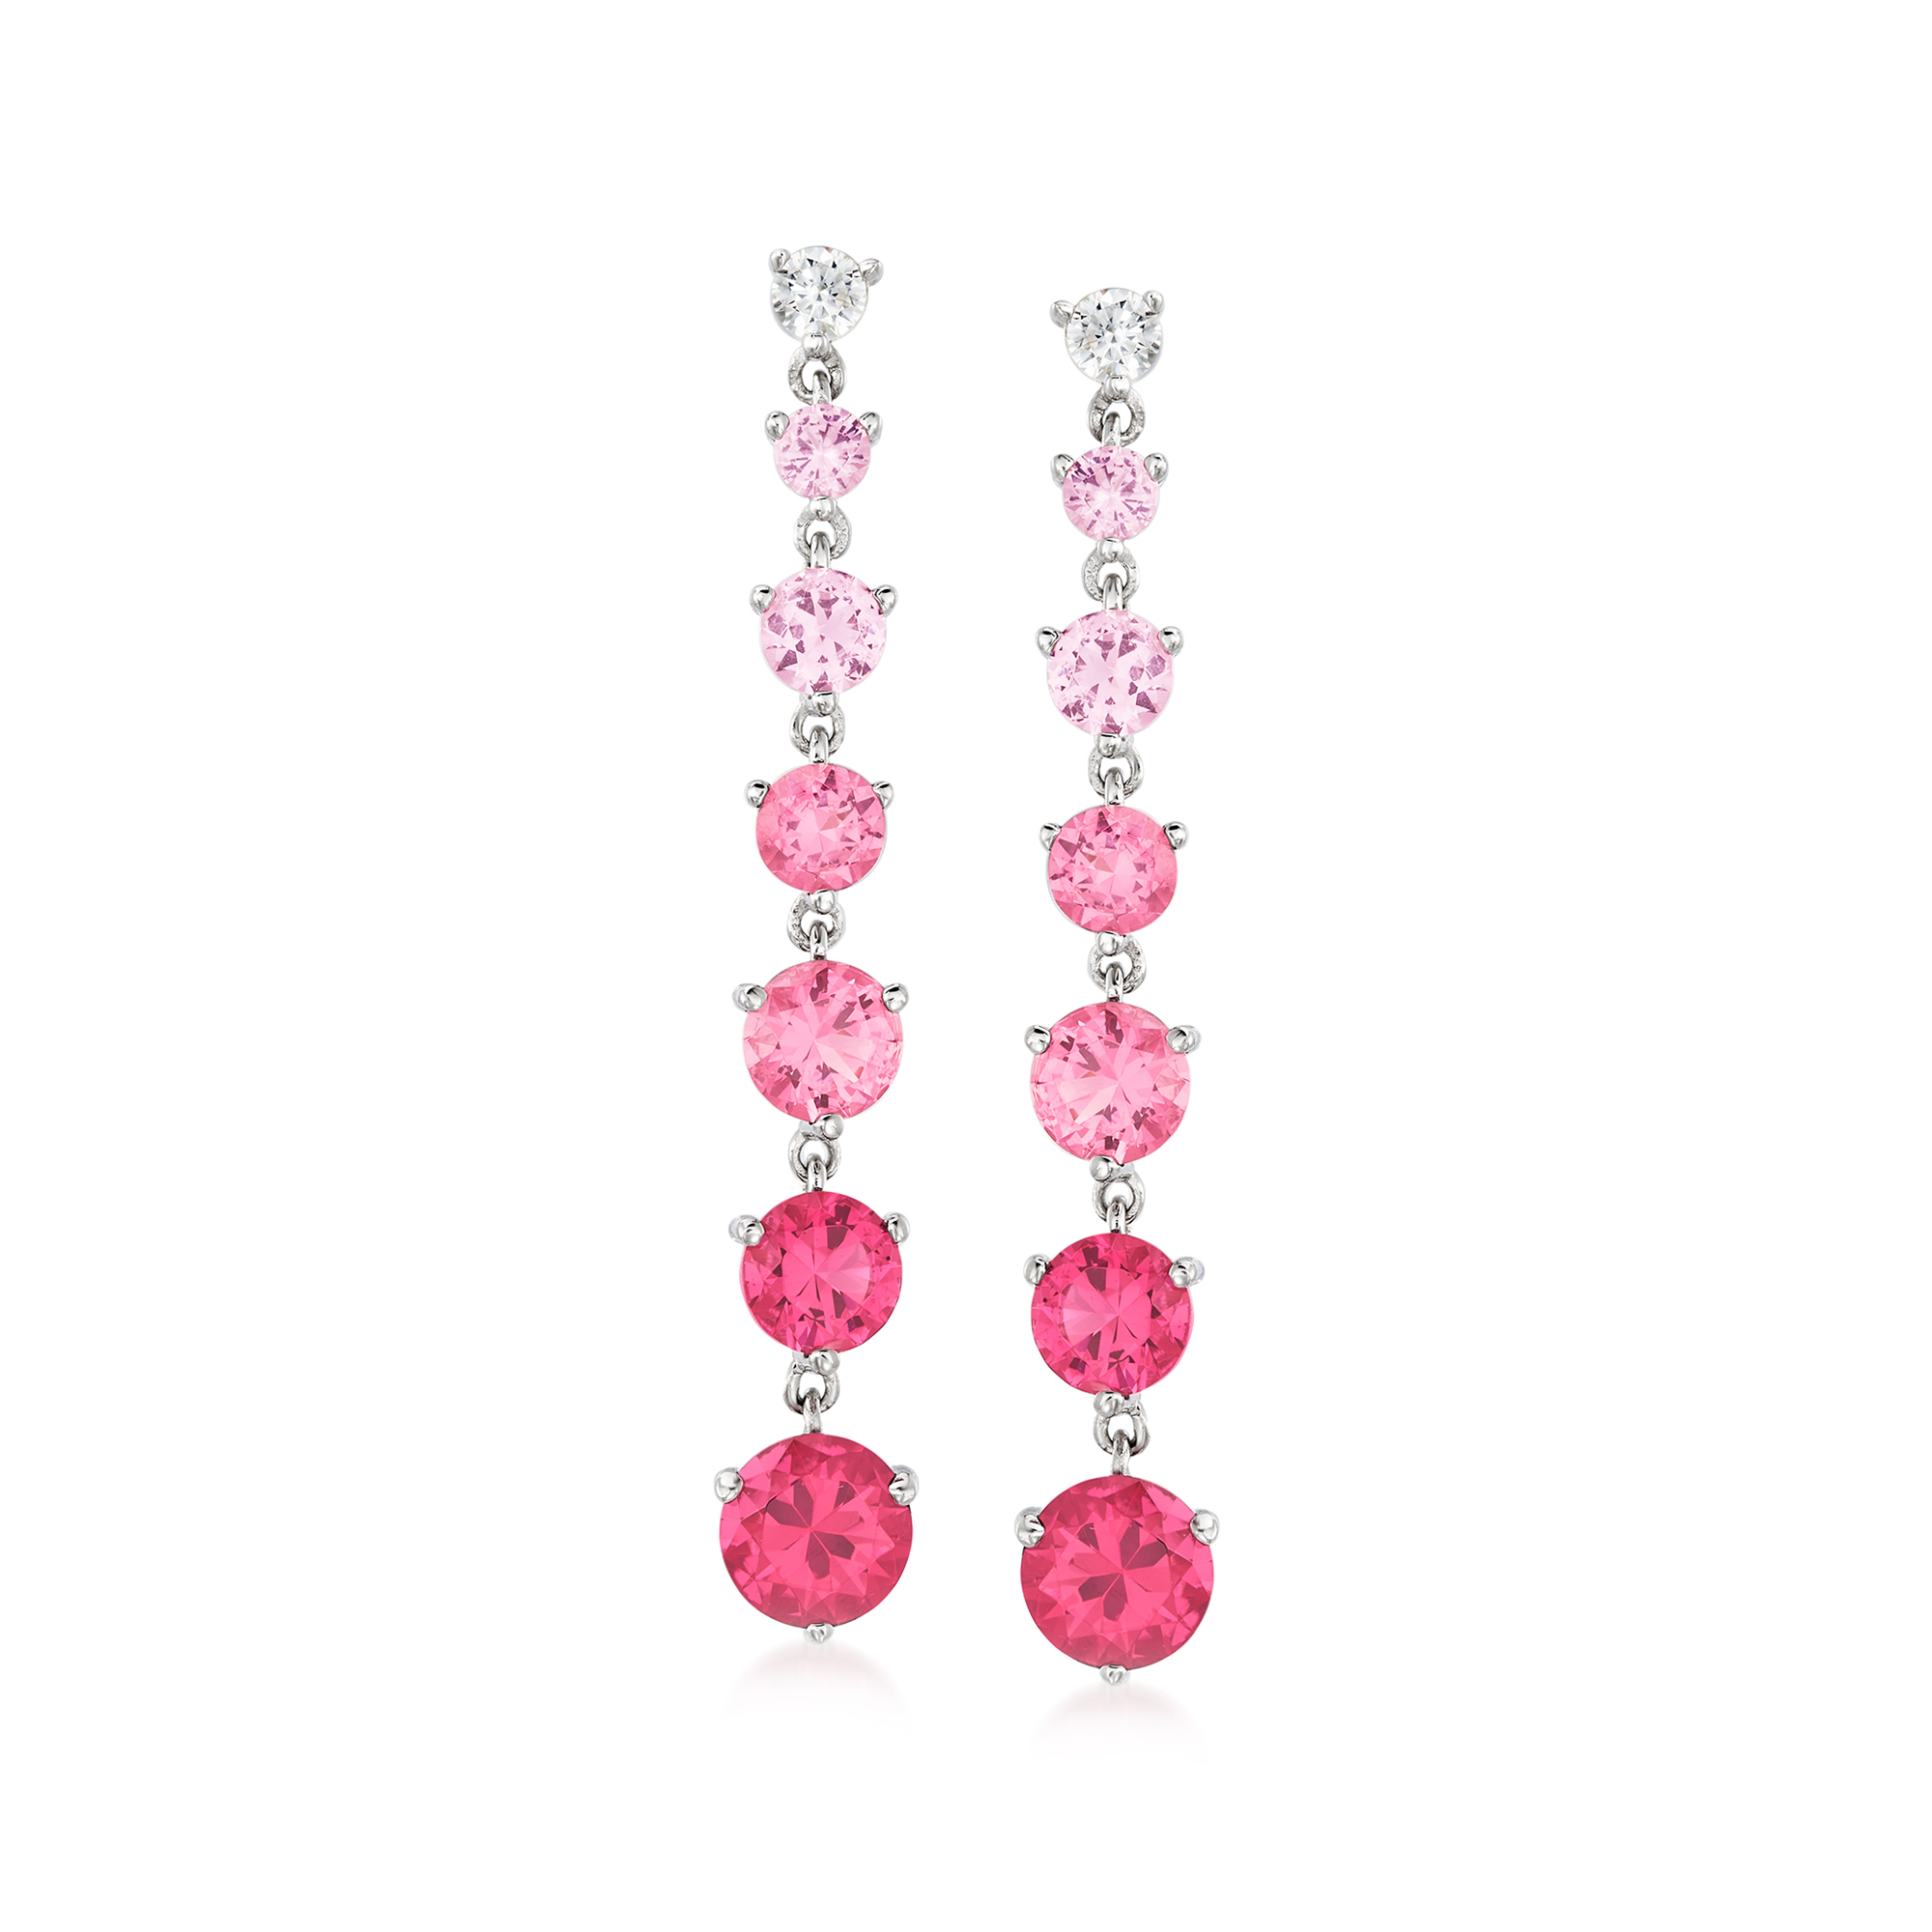 4.50 ct. tw Simulated Pink Sapphire and .20 ct. tw CZ Drop Earrings 